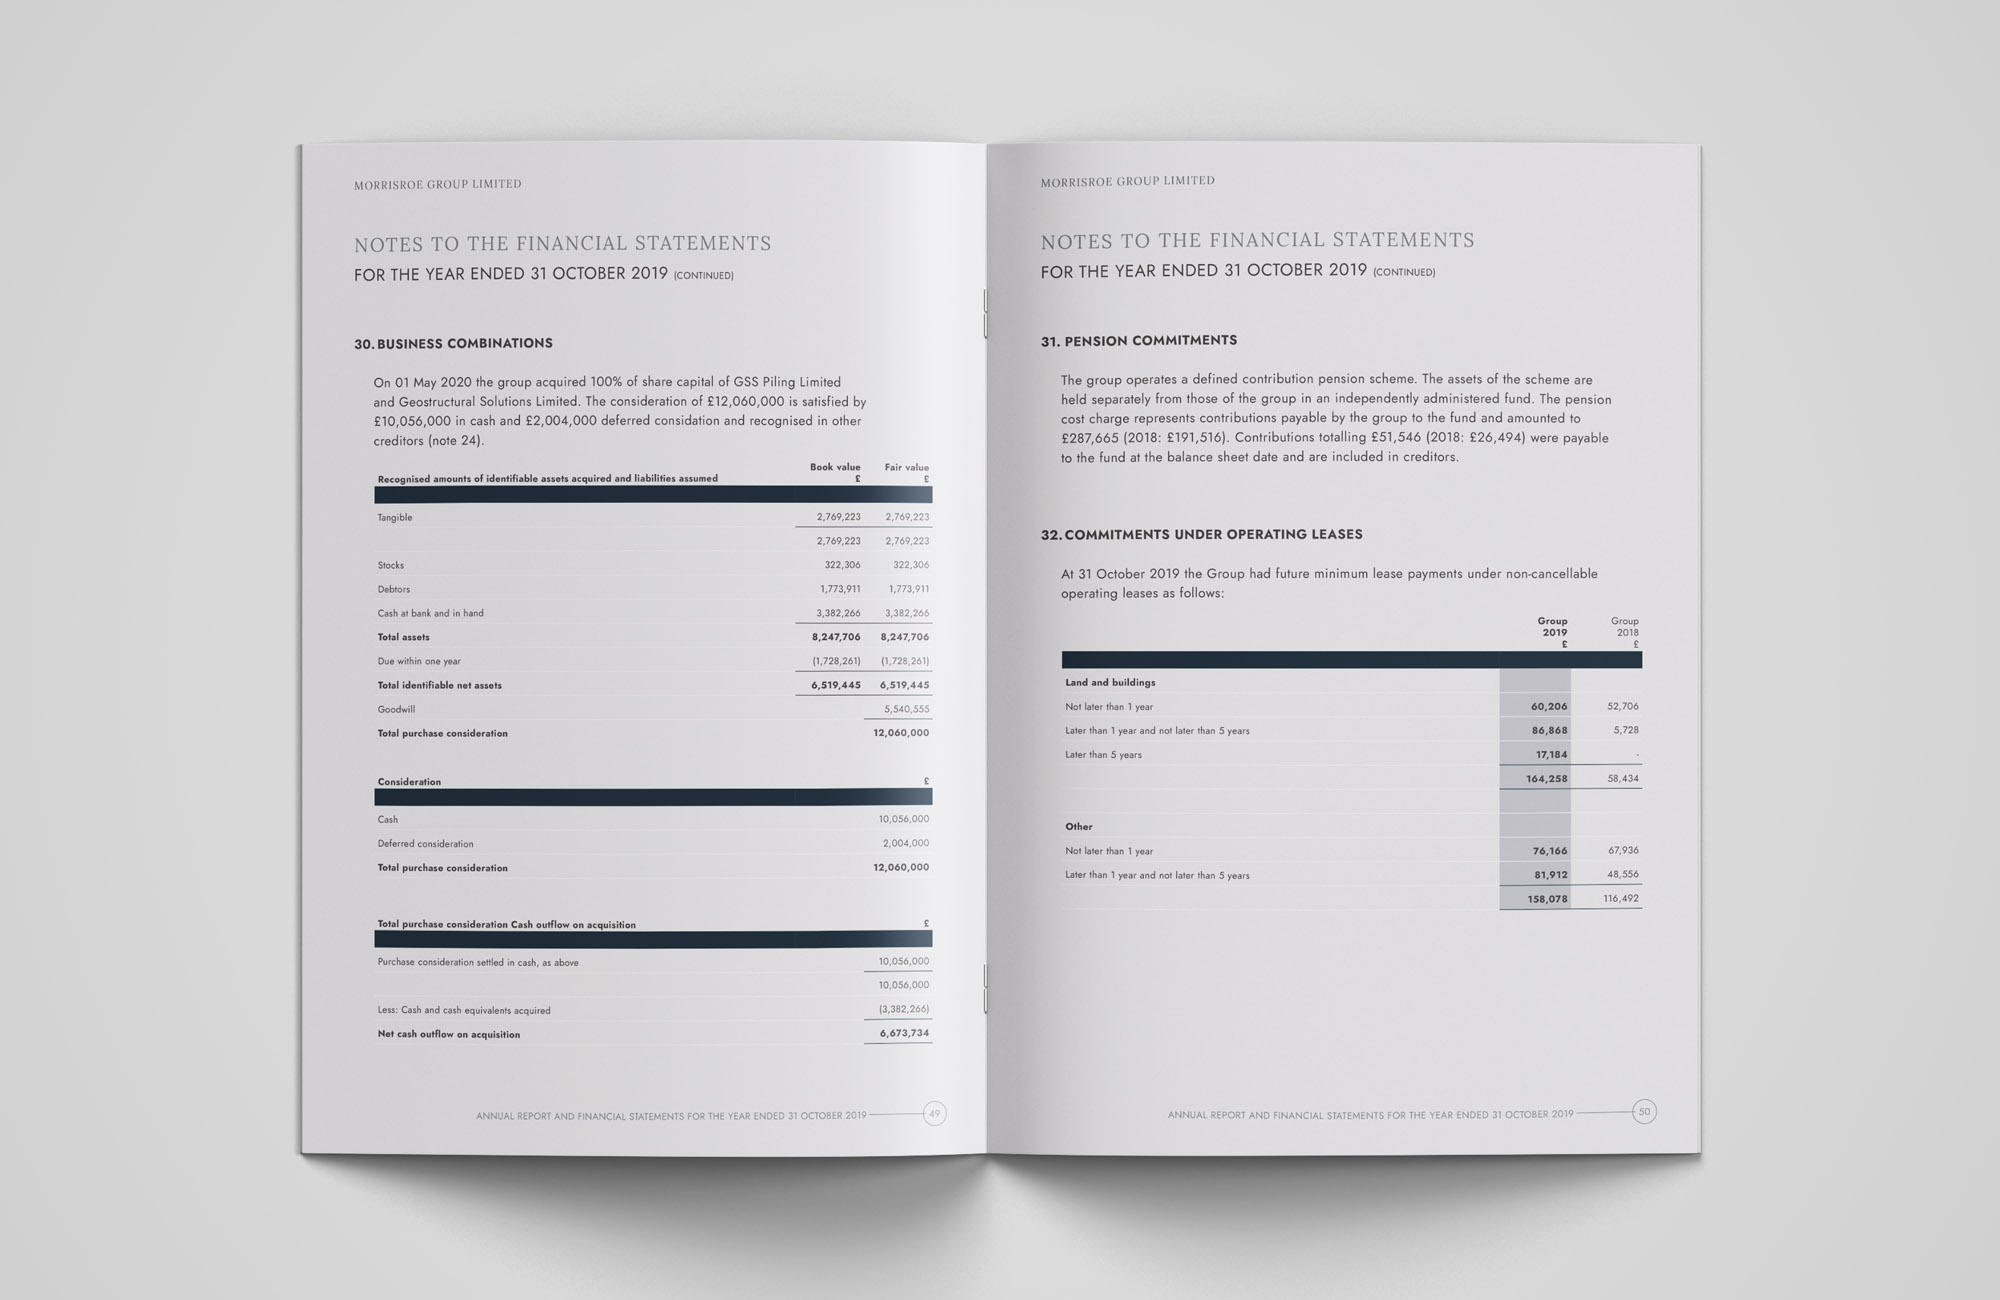 morrisroe annual report and financial statements